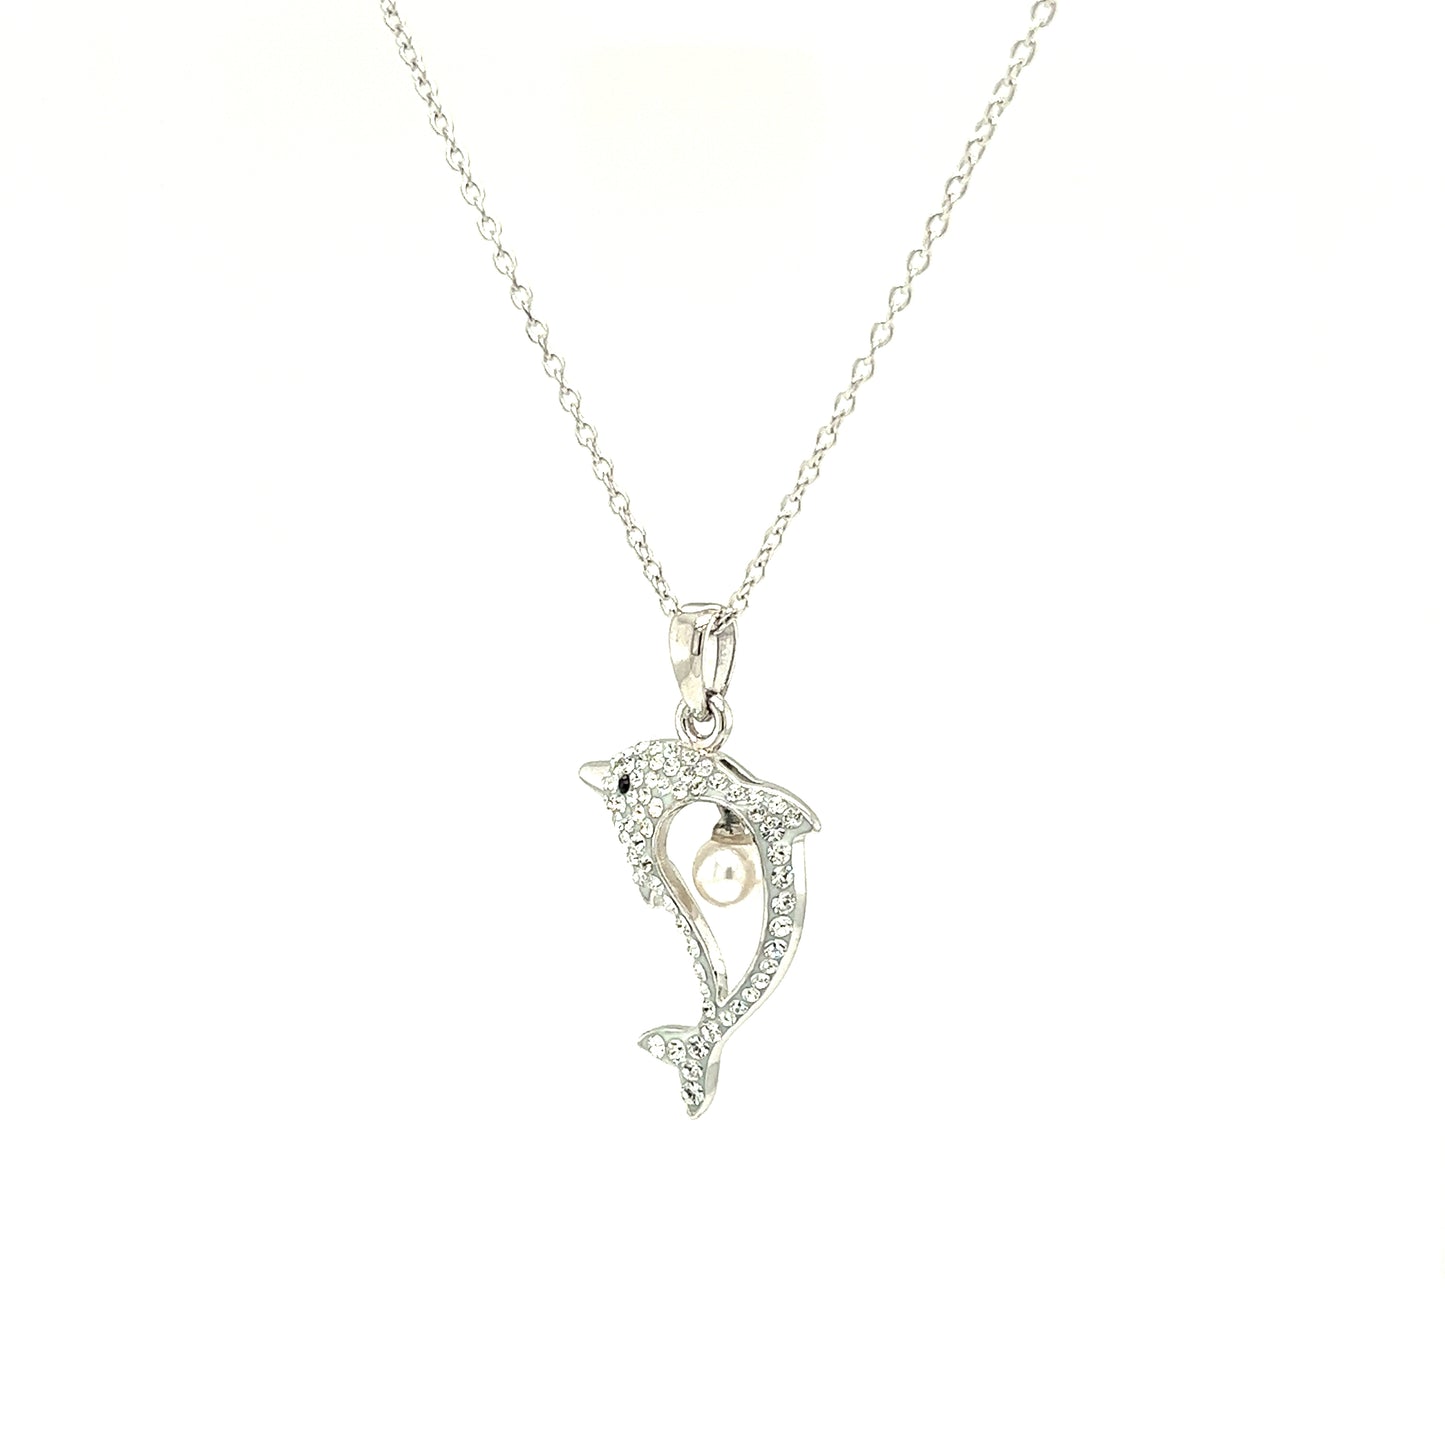 Dolphin Necklace With 4mm White Pearl and White Crystals in Sterling Silver Left Side View